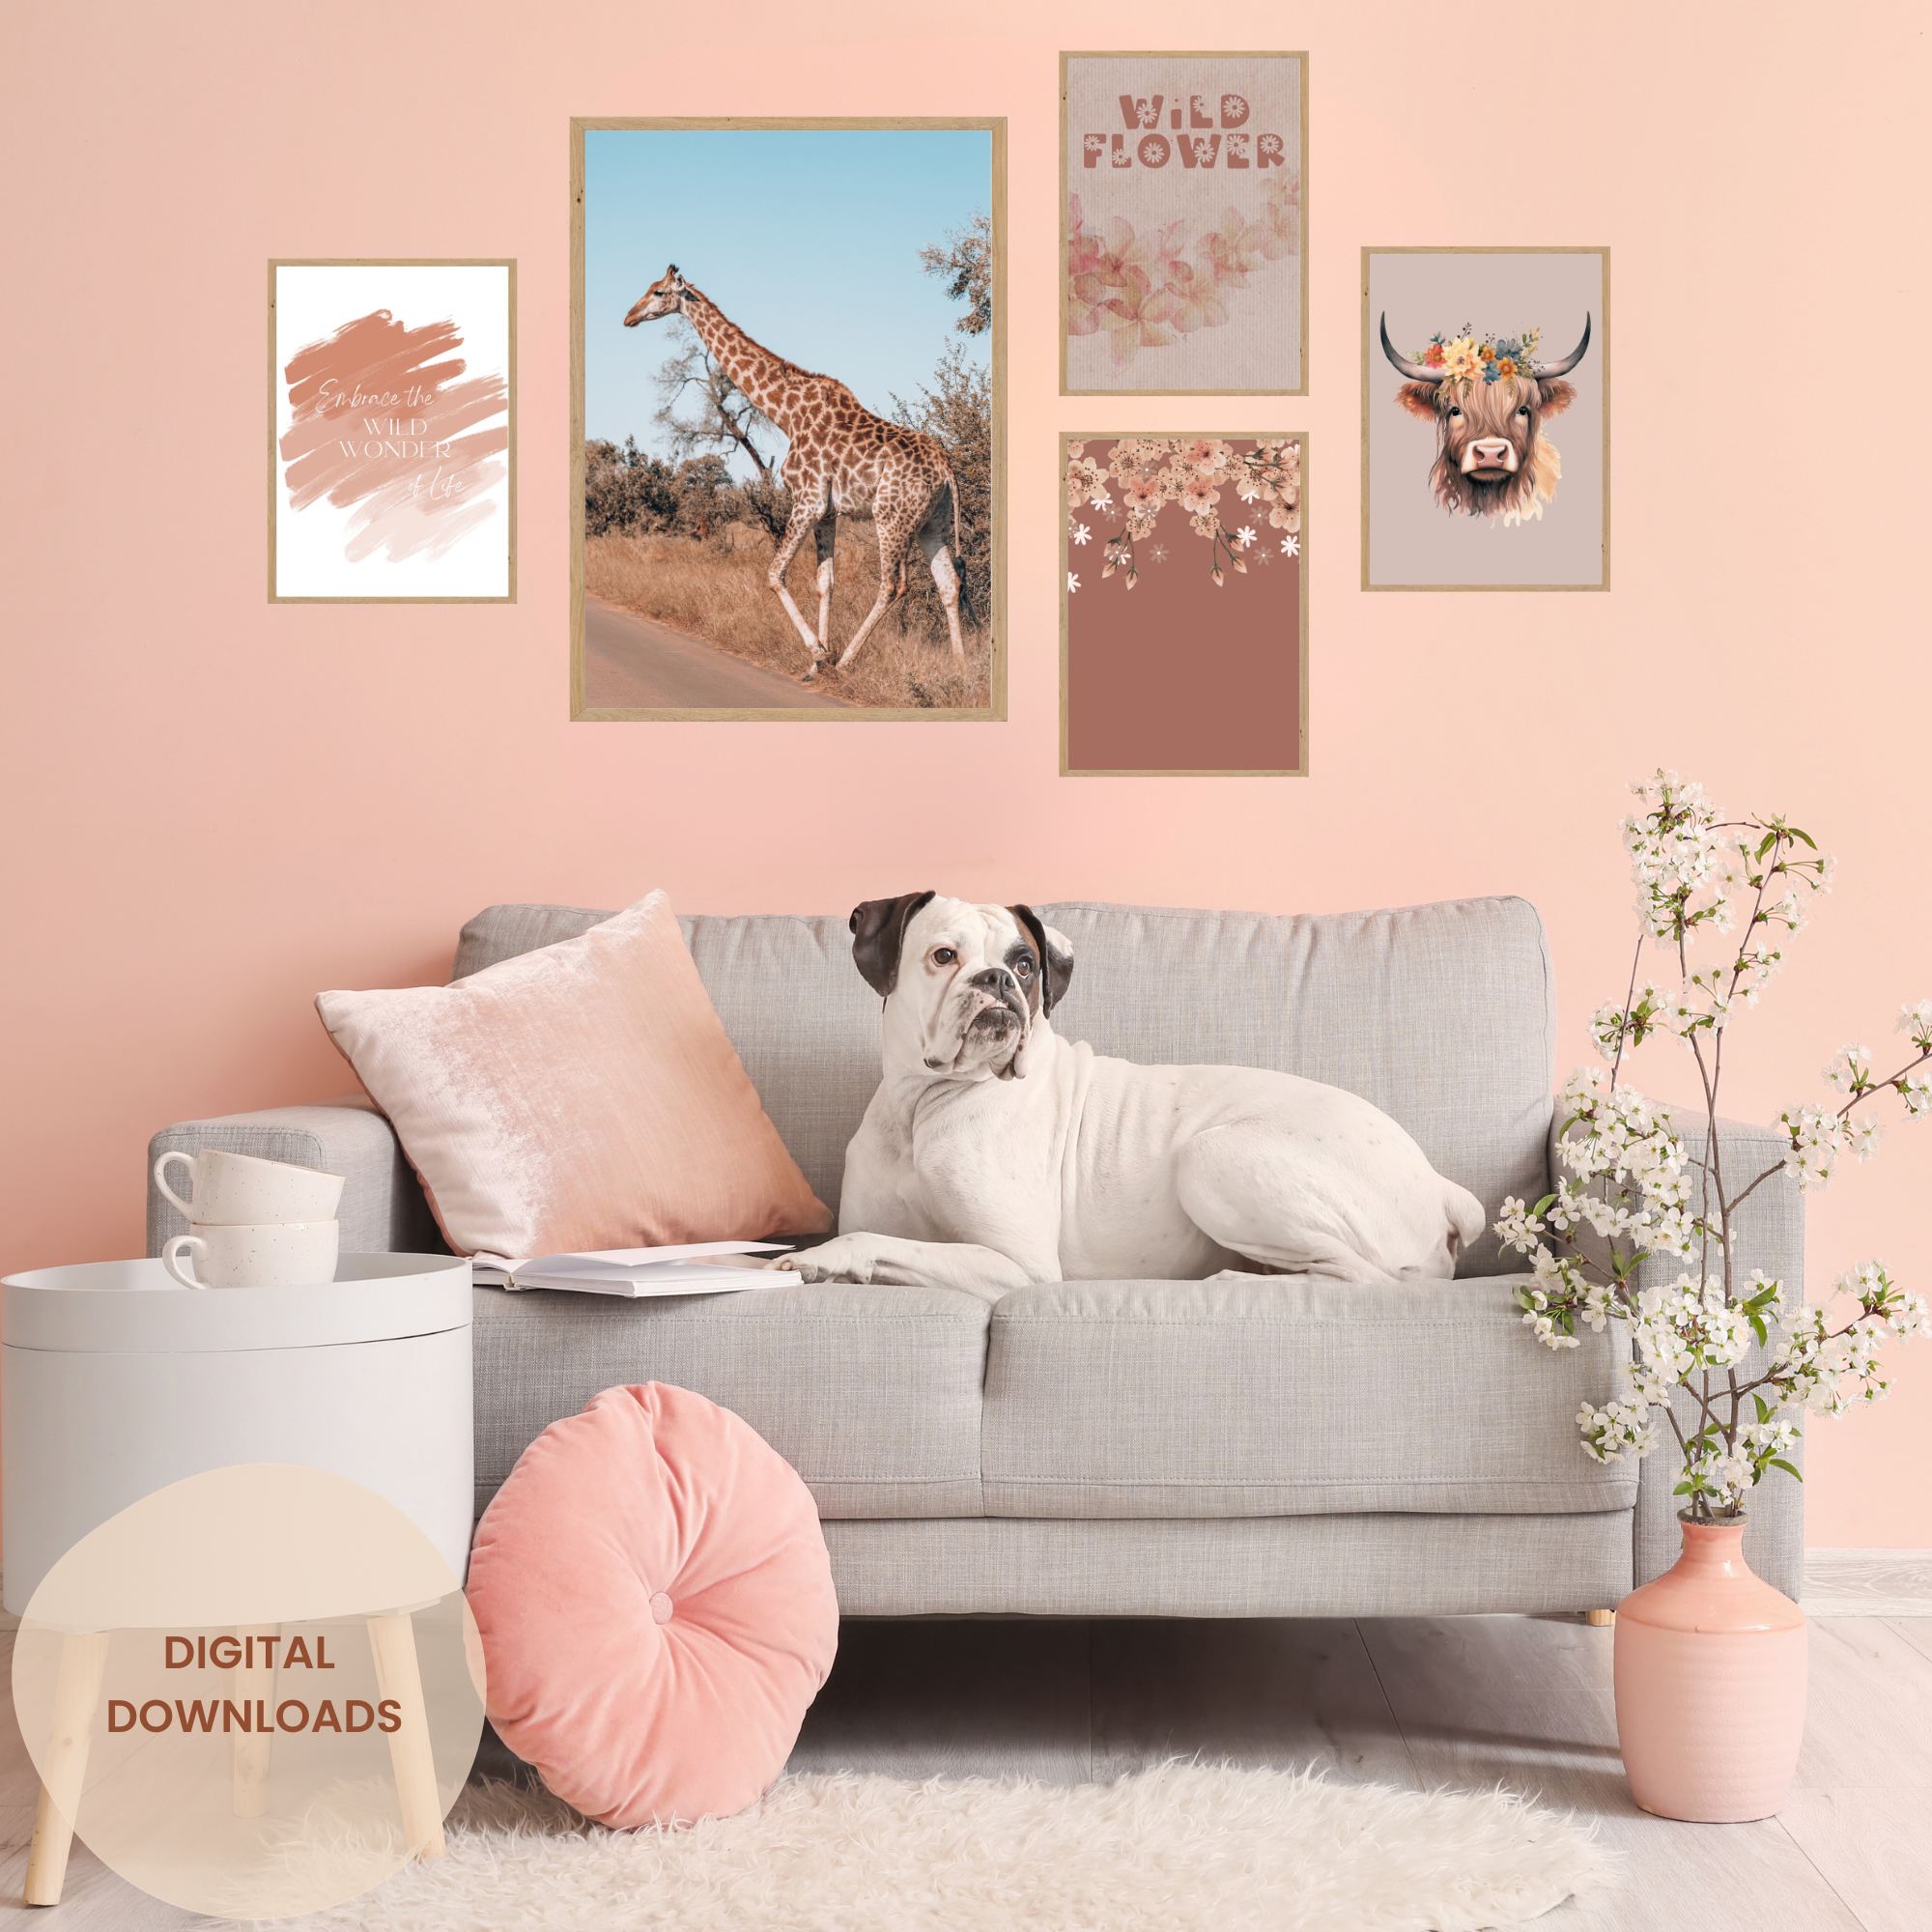 Shades of Pink African Animal Gallery Wall Printables